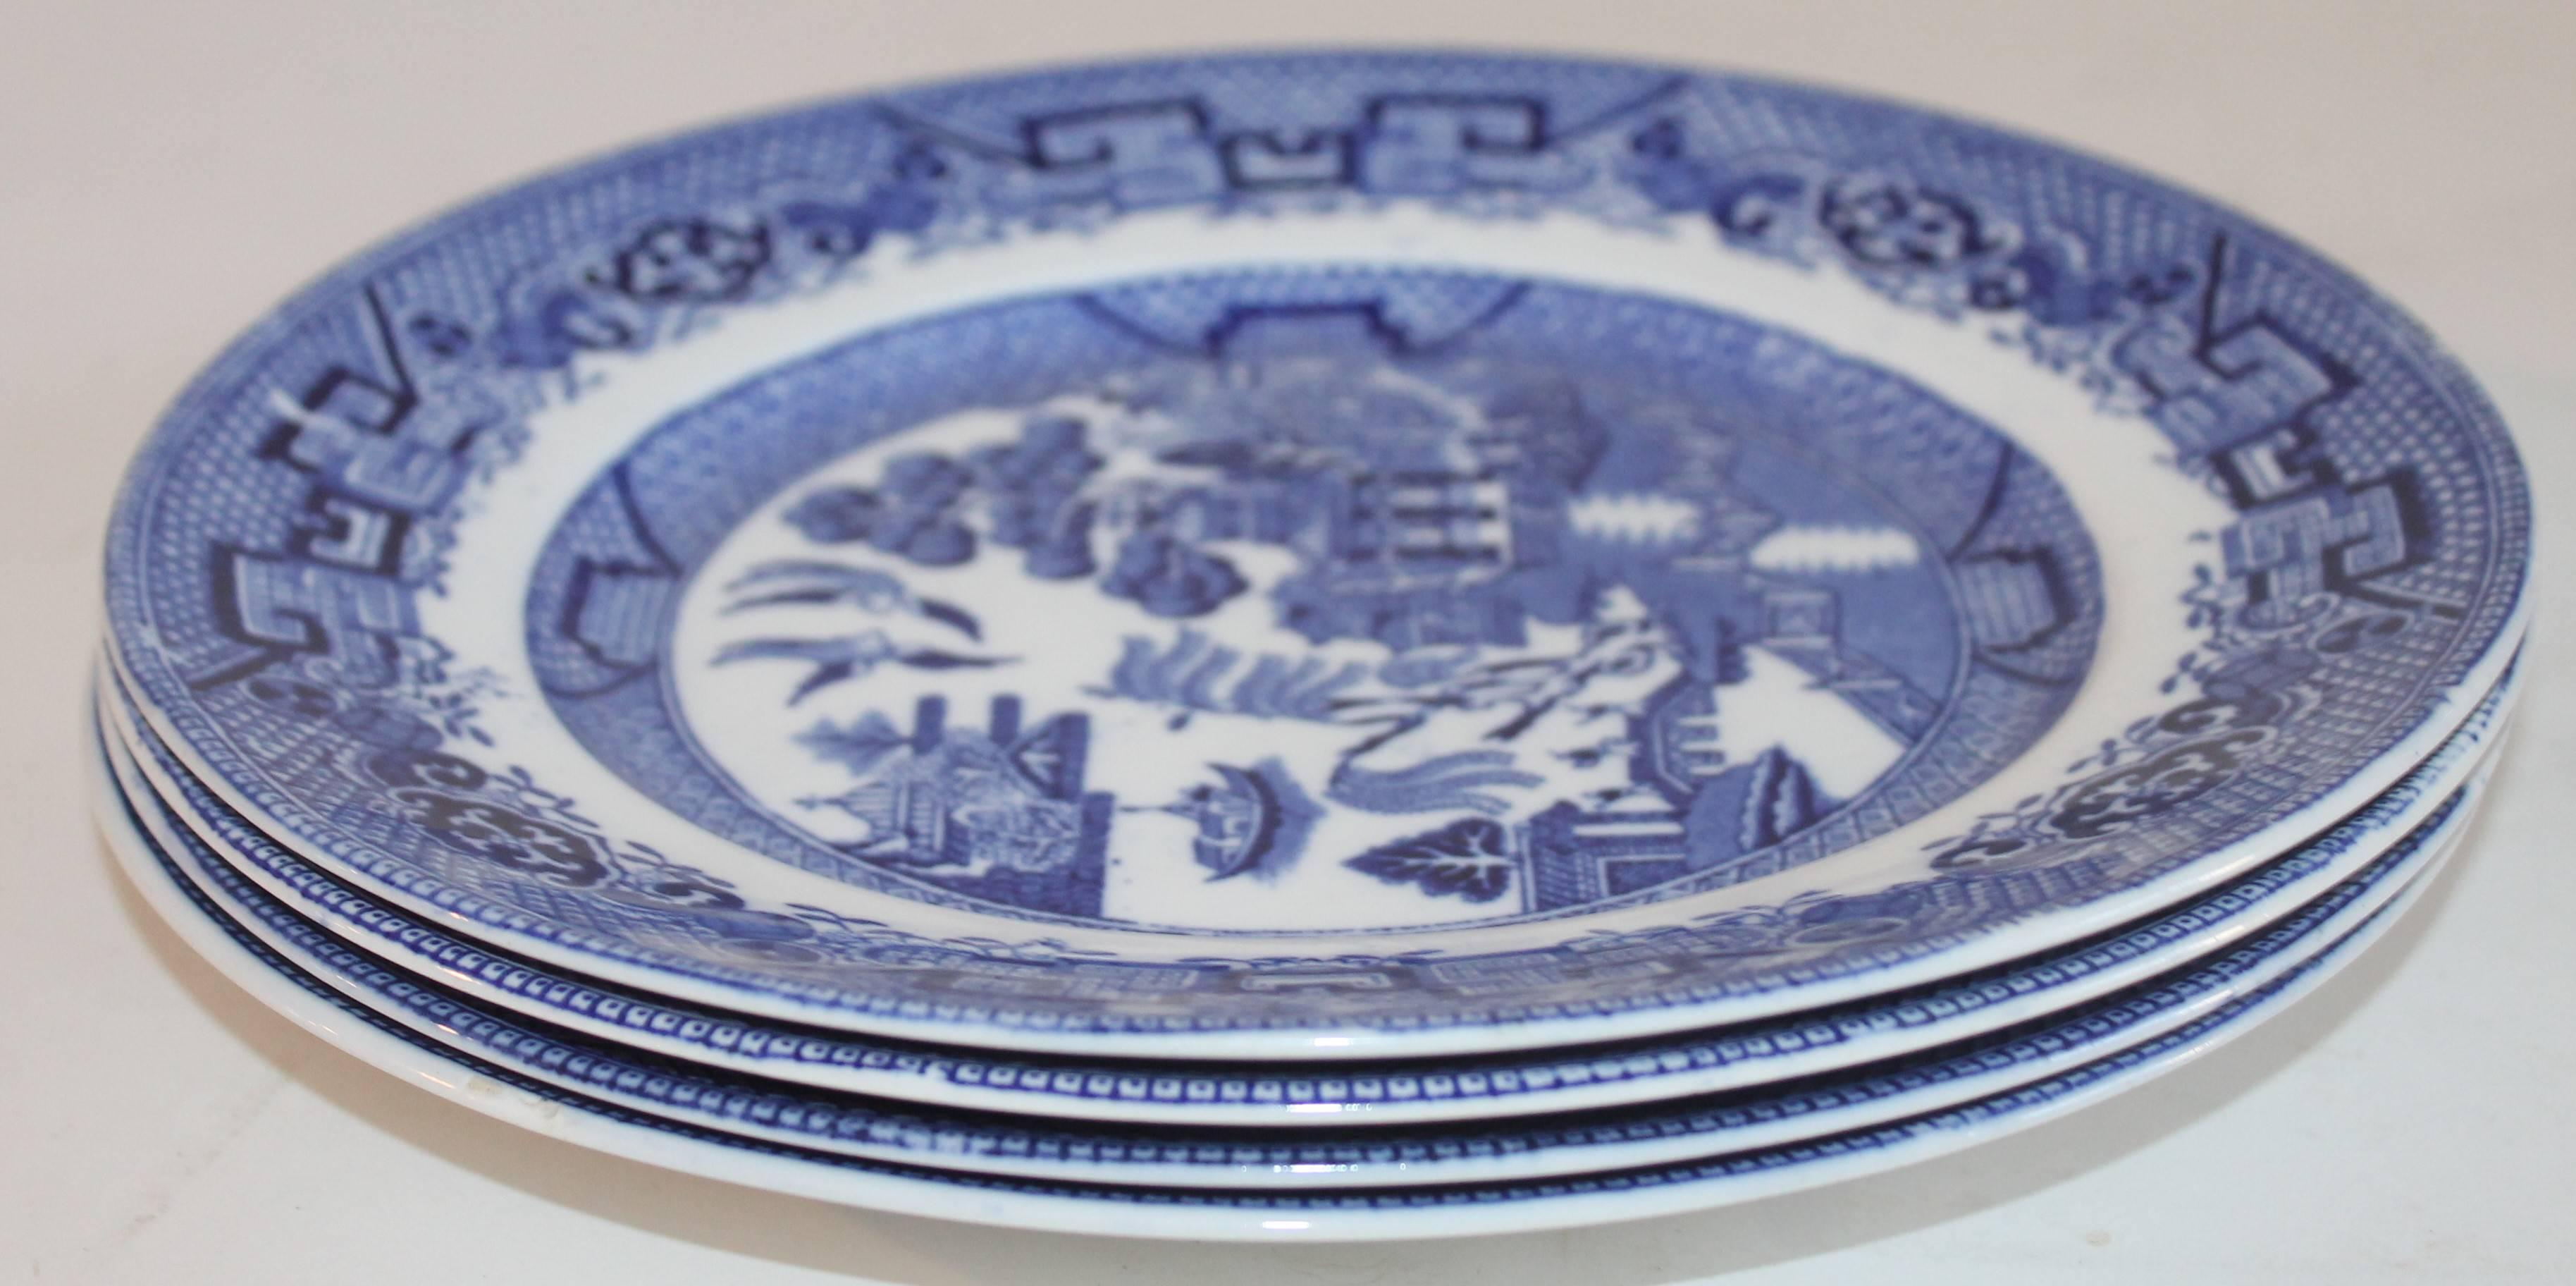 L. Bamberger and Co. is a New Jersey founded company which made blue willow in the 19Thc . This blue willow set is in amazing condition and is sold in a set of four.